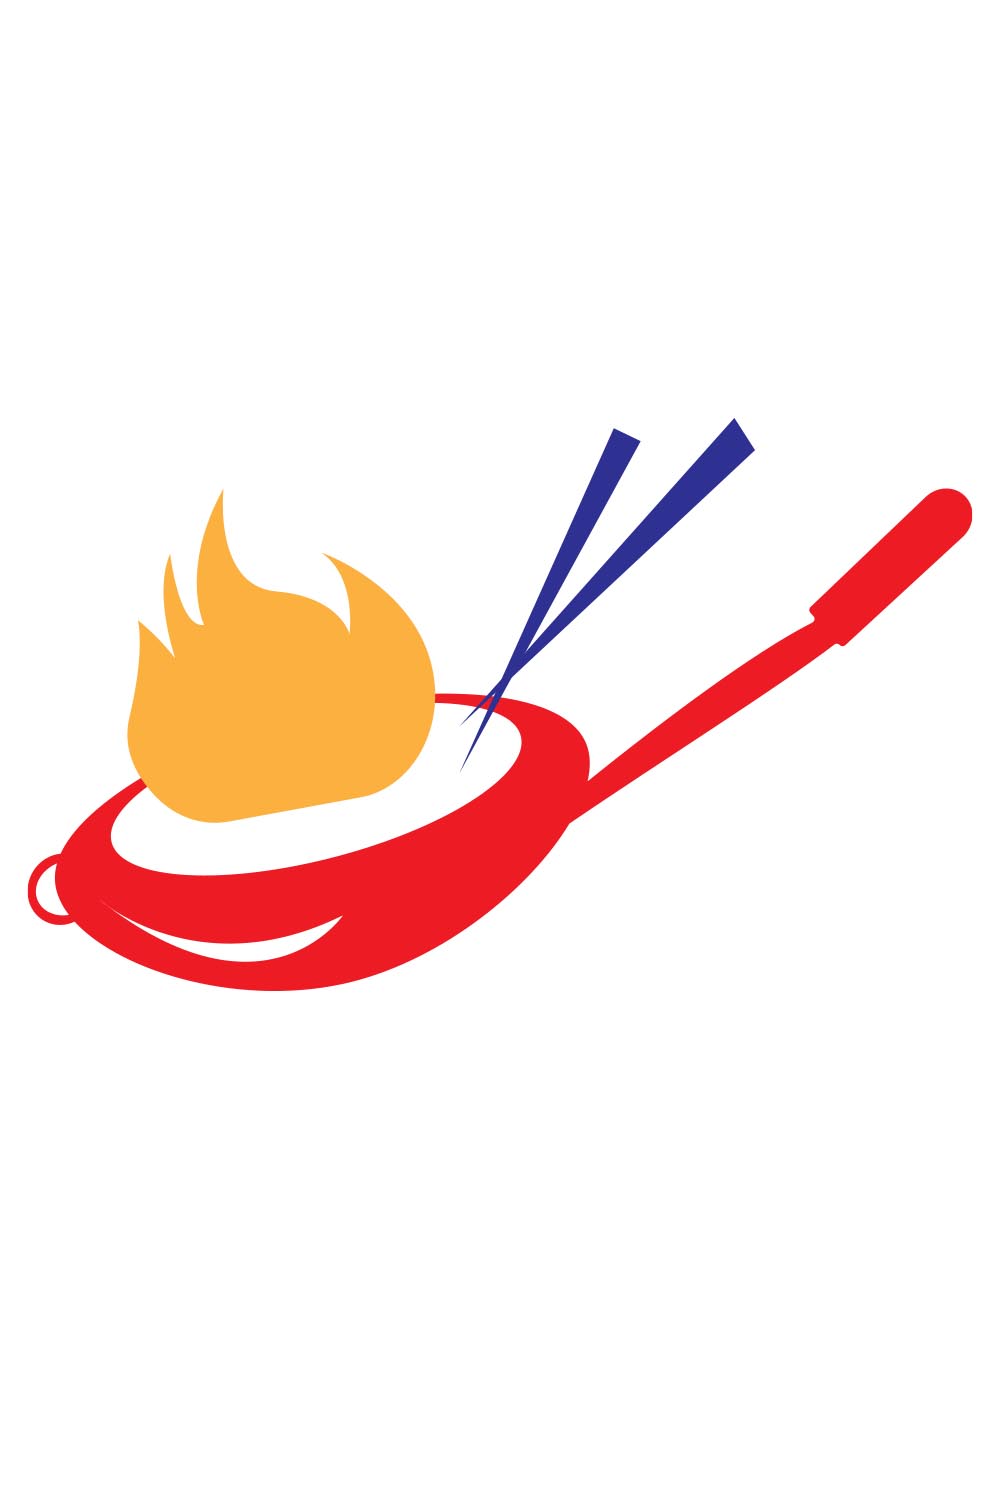 Cooking logo pinterest preview image.